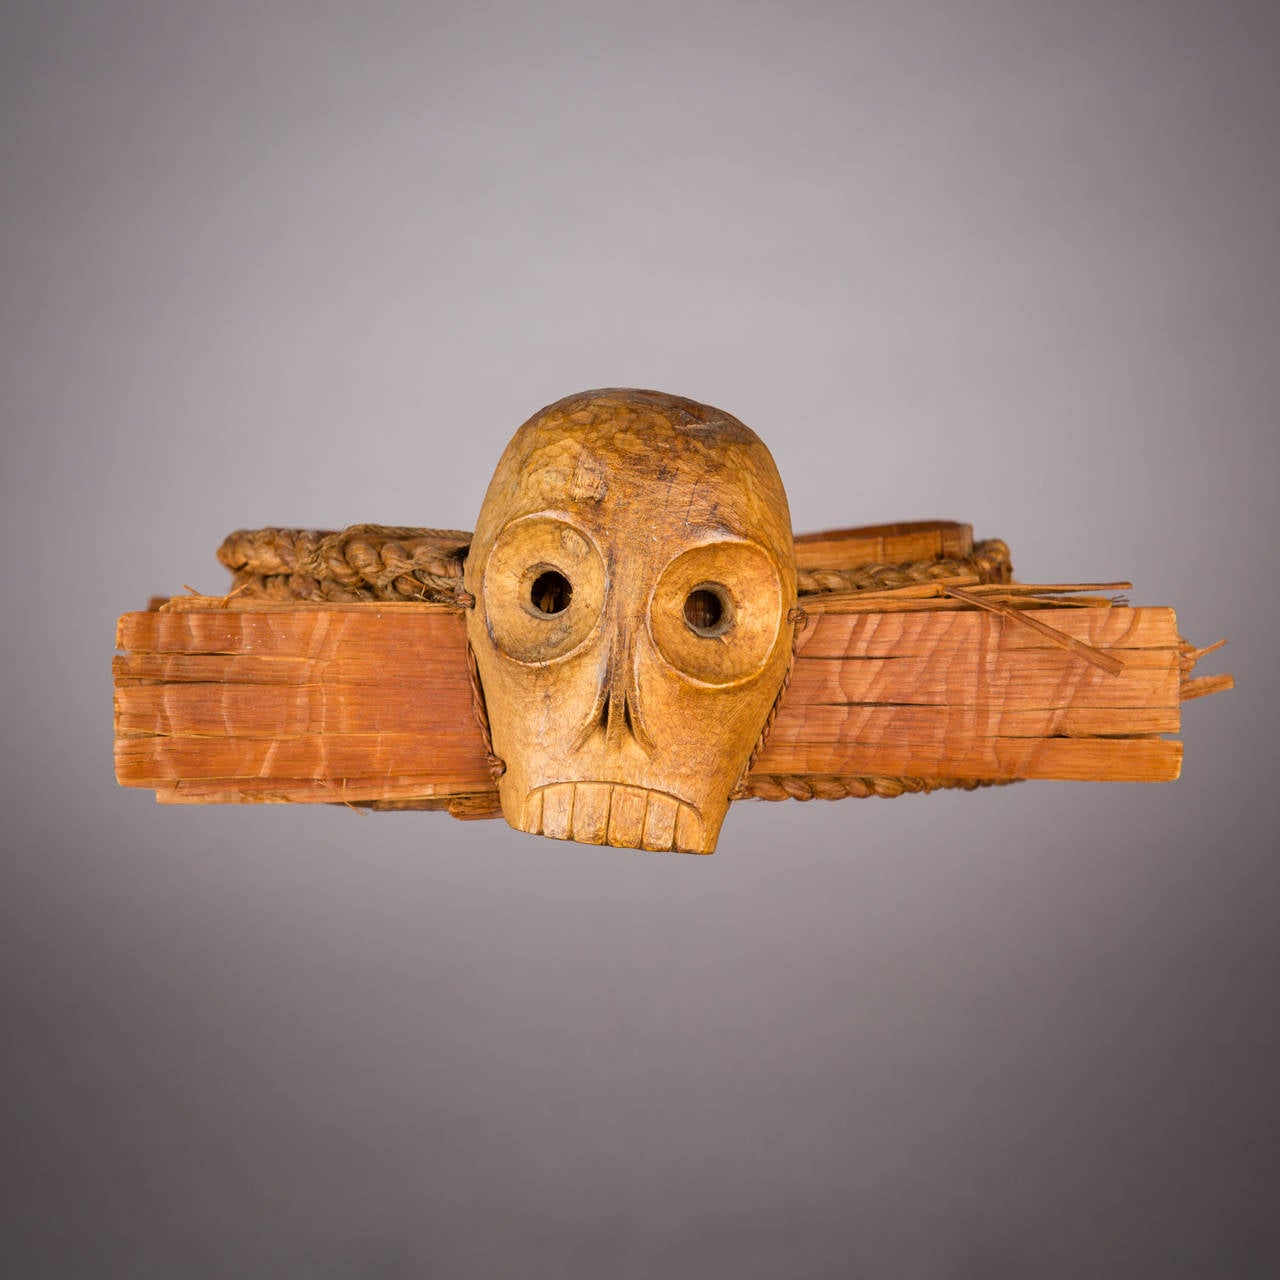 This fine and rare, headdress with skull motif, is of a type used in the initiatory Hamat'sa (Cannibal Dance) ceremony and forms an element in its associated regalia. One of the most important of Kwakiutl winter rituals, the Hamat'sa sees the